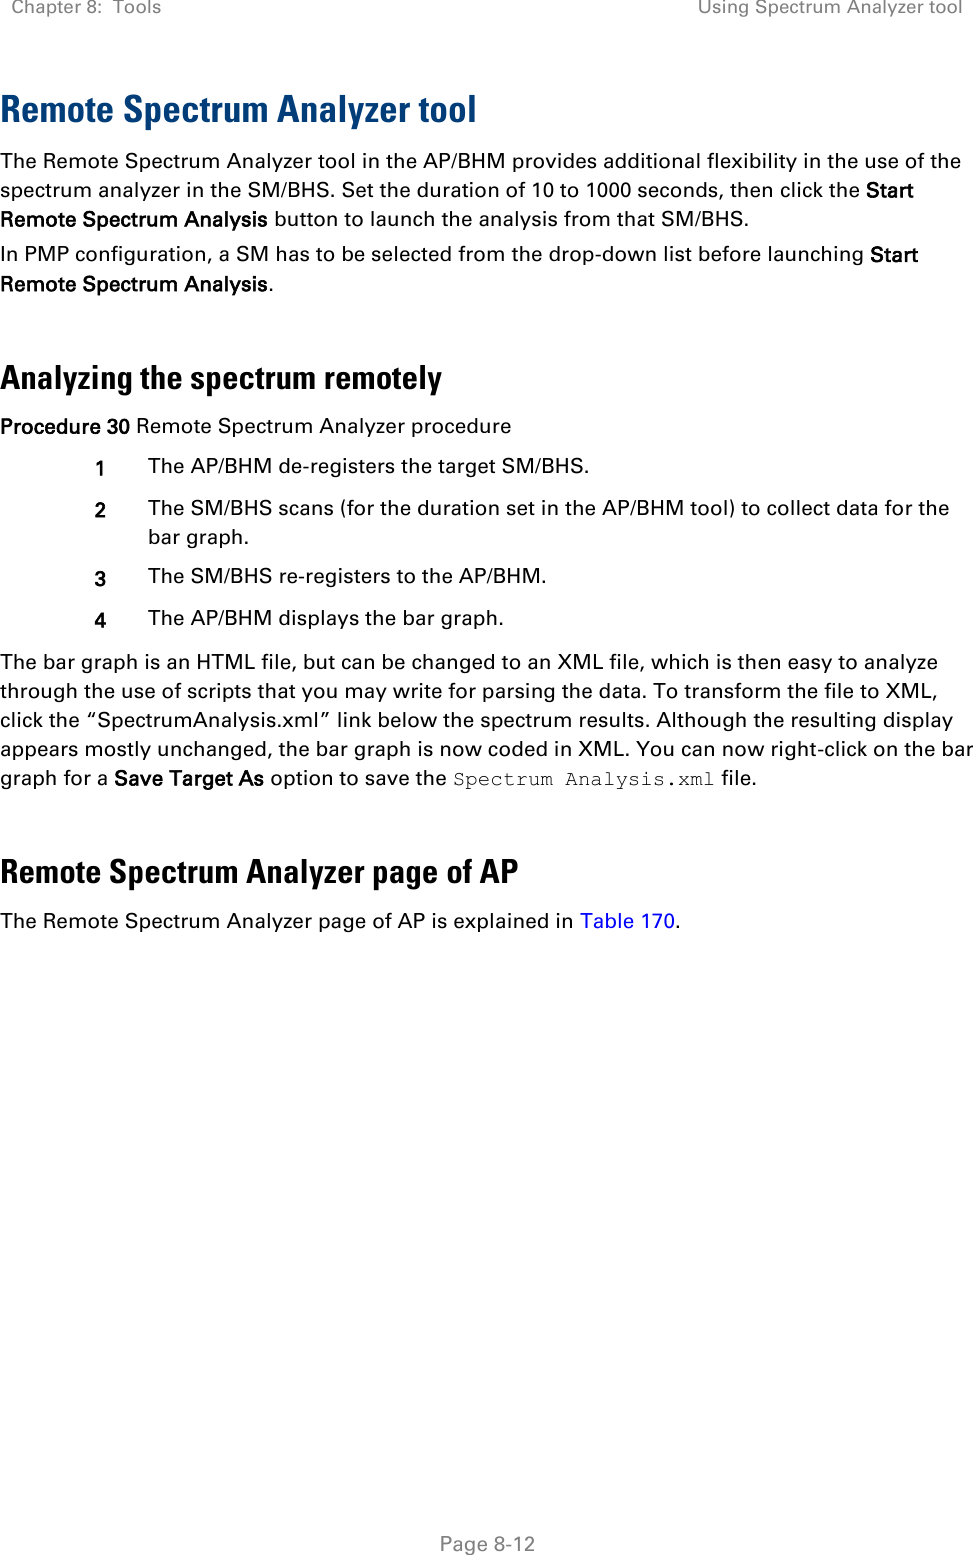 Chapter 8:  Tools Using Spectrum Analyzer tool   Page 8-12 Remote Spectrum Analyzer tool  The Remote Spectrum Analyzer tool in the AP/BHM provides additional flexibility in the use of the spectrum analyzer in the SM/BHS. Set the duration of 10 to 1000 seconds, then click the Start Remote Spectrum Analysis button to launch the analysis from that SM/BHS.  In PMP configuration, a SM has to be selected from the drop-down list before launching Start Remote Spectrum Analysis.  Analyzing the spectrum remotely Procedure 30 Remote Spectrum Analyzer procedure 1 The AP/BHM de-registers the target SM/BHS. 2 The SM/BHS scans (for the duration set in the AP/BHM tool) to collect data for the bar graph. 3 The SM/BHS re-registers to the AP/BHM. 4 The AP/BHM displays the bar graph. The bar graph is an HTML file, but can be changed to an XML file, which is then easy to analyze through the use of scripts that you may write for parsing the data. To transform the file to XML, click the “SpectrumAnalysis.xml” link below the spectrum results. Although the resulting display appears mostly unchanged, the bar graph is now coded in XML. You can now right-click on the bar graph for a Save Target As option to save the Spectrum Analysis.xml file.  Remote Spectrum Analyzer page of AP The Remote Spectrum Analyzer page of AP is explained in Table 170. 